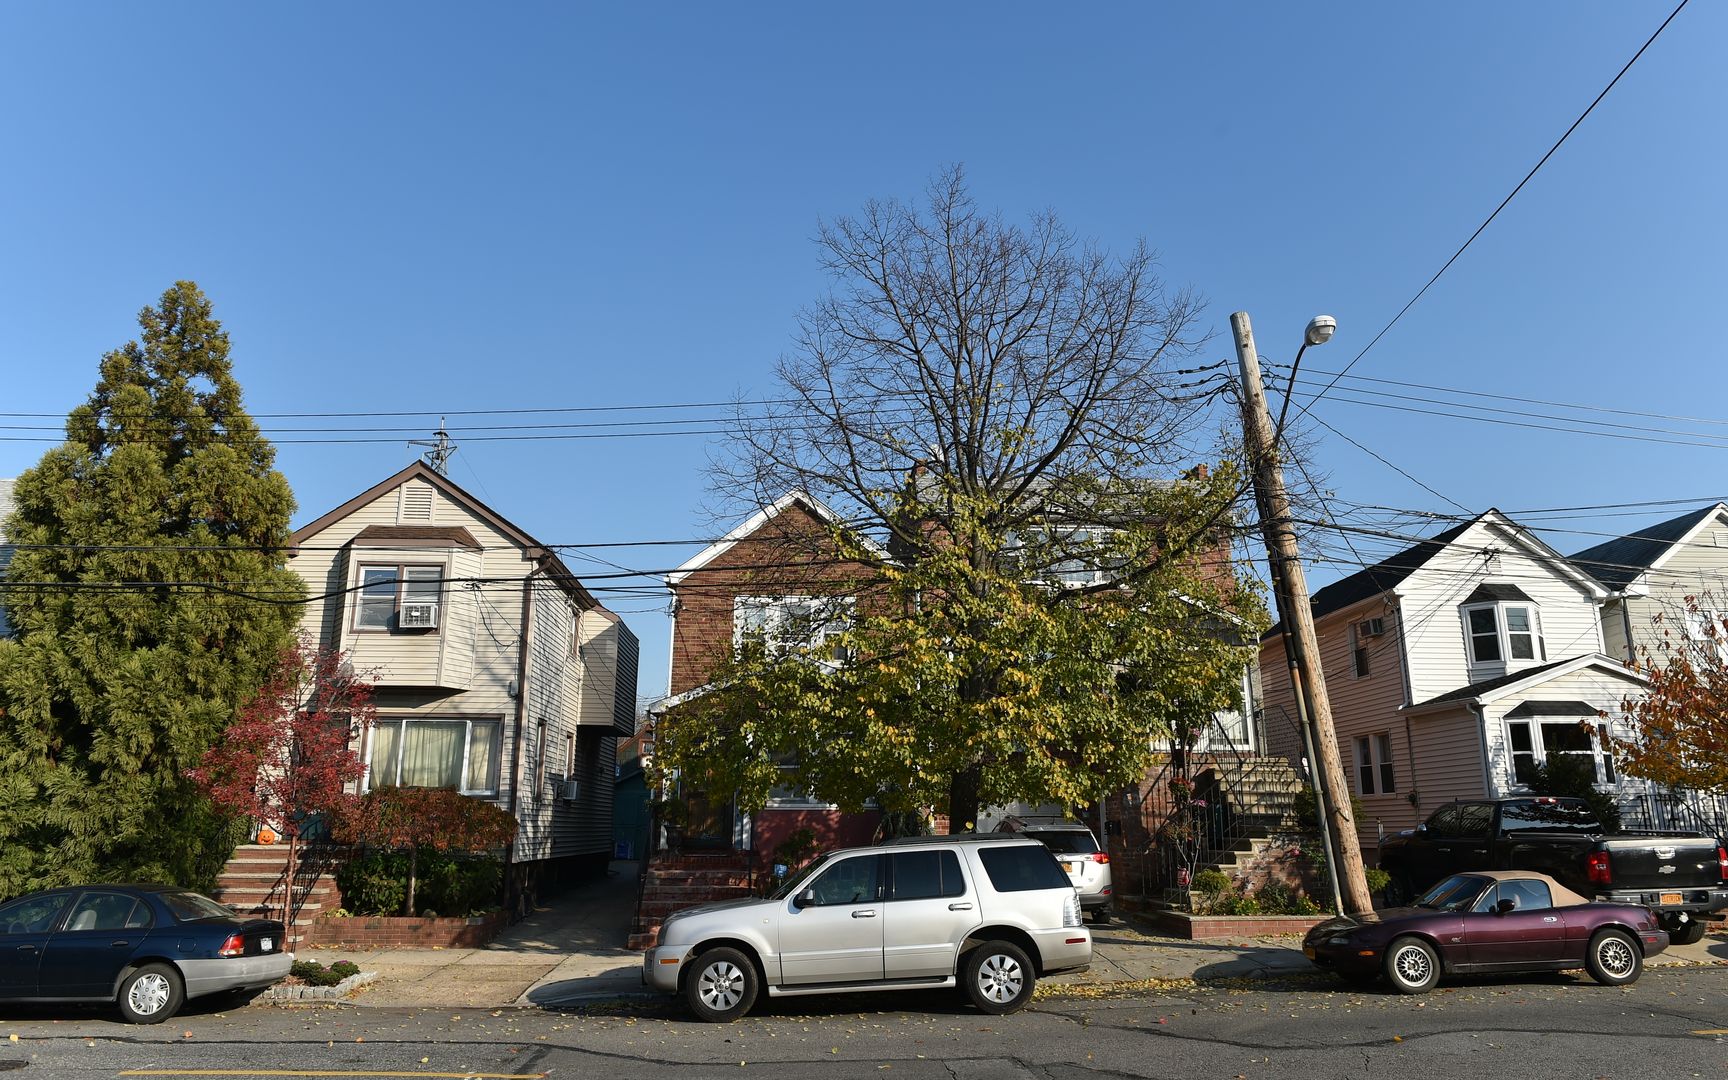 New York City, USA - November 16, 2016: View of a street in a residential neighbourhood of the borough of Queens. homify